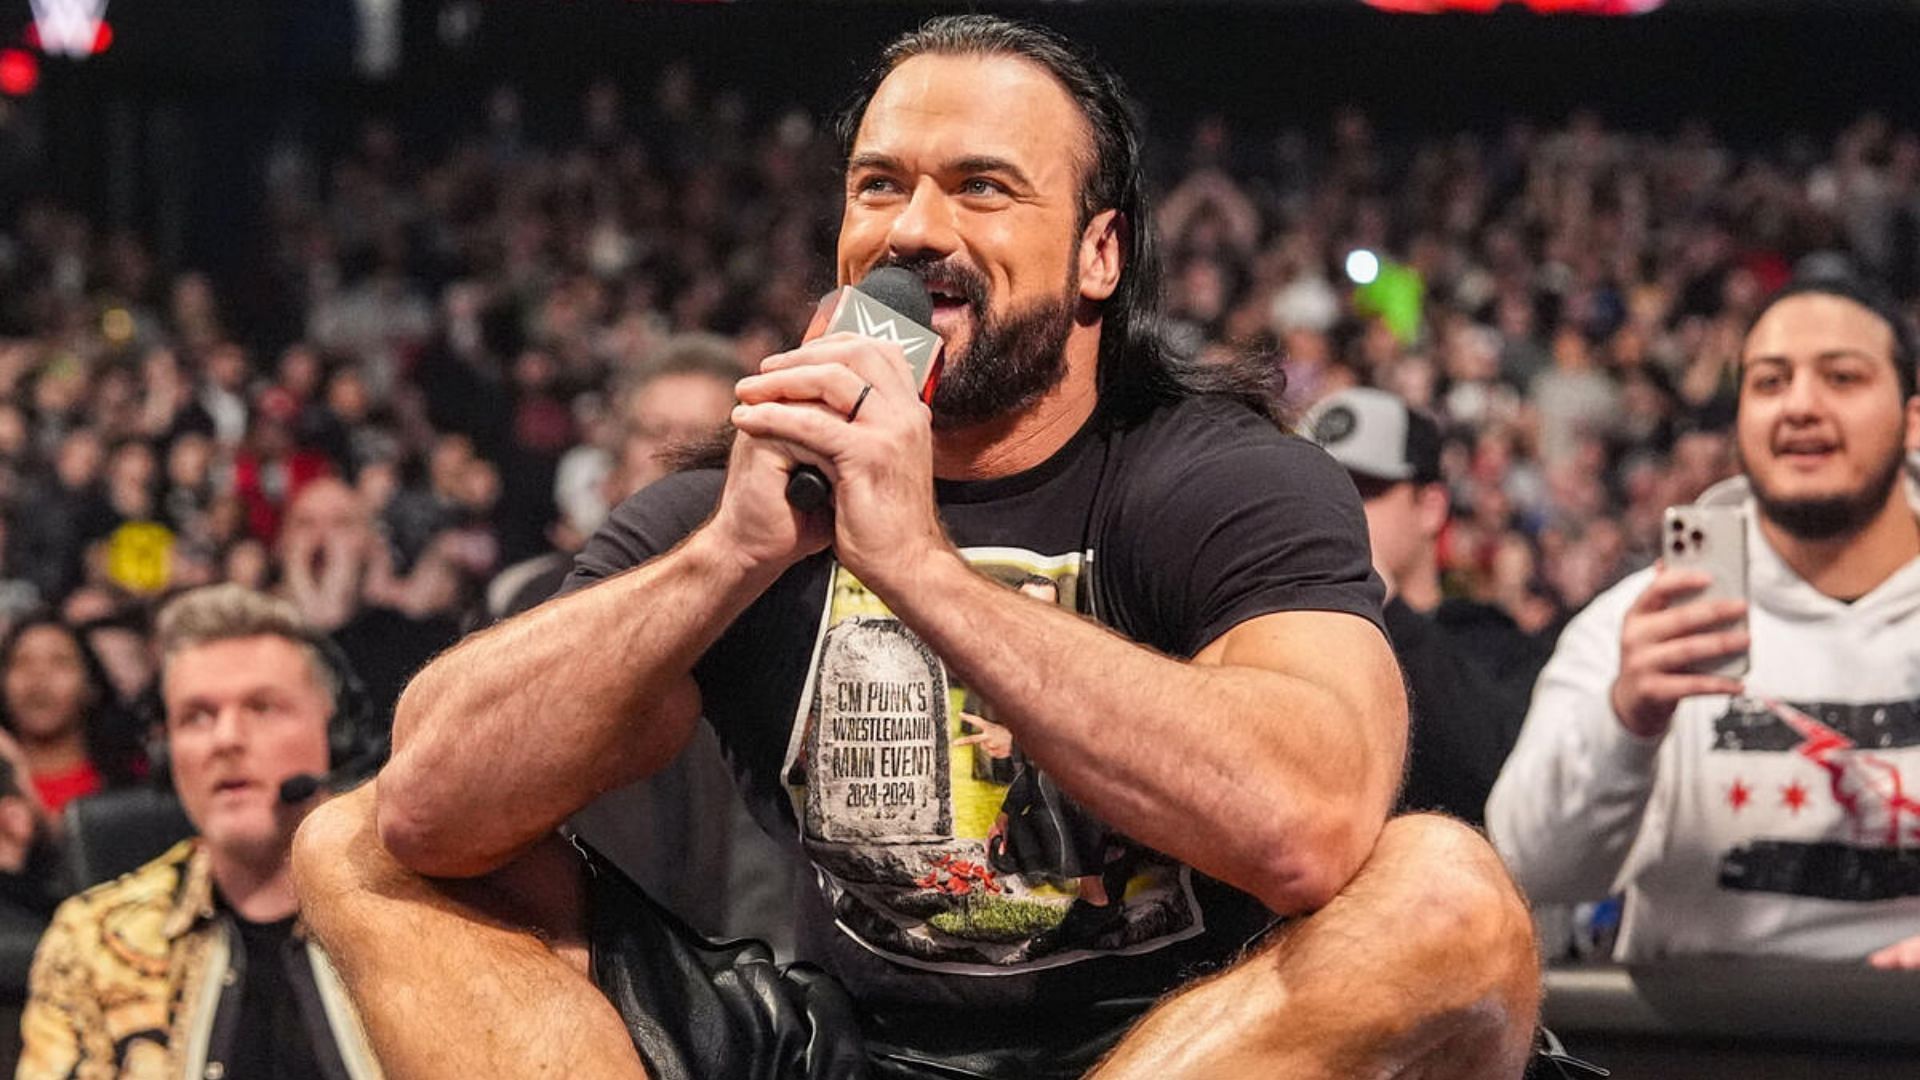 Drew McIntyre was involved in a heated segment with CM Punk and Seth Rollins on RAW